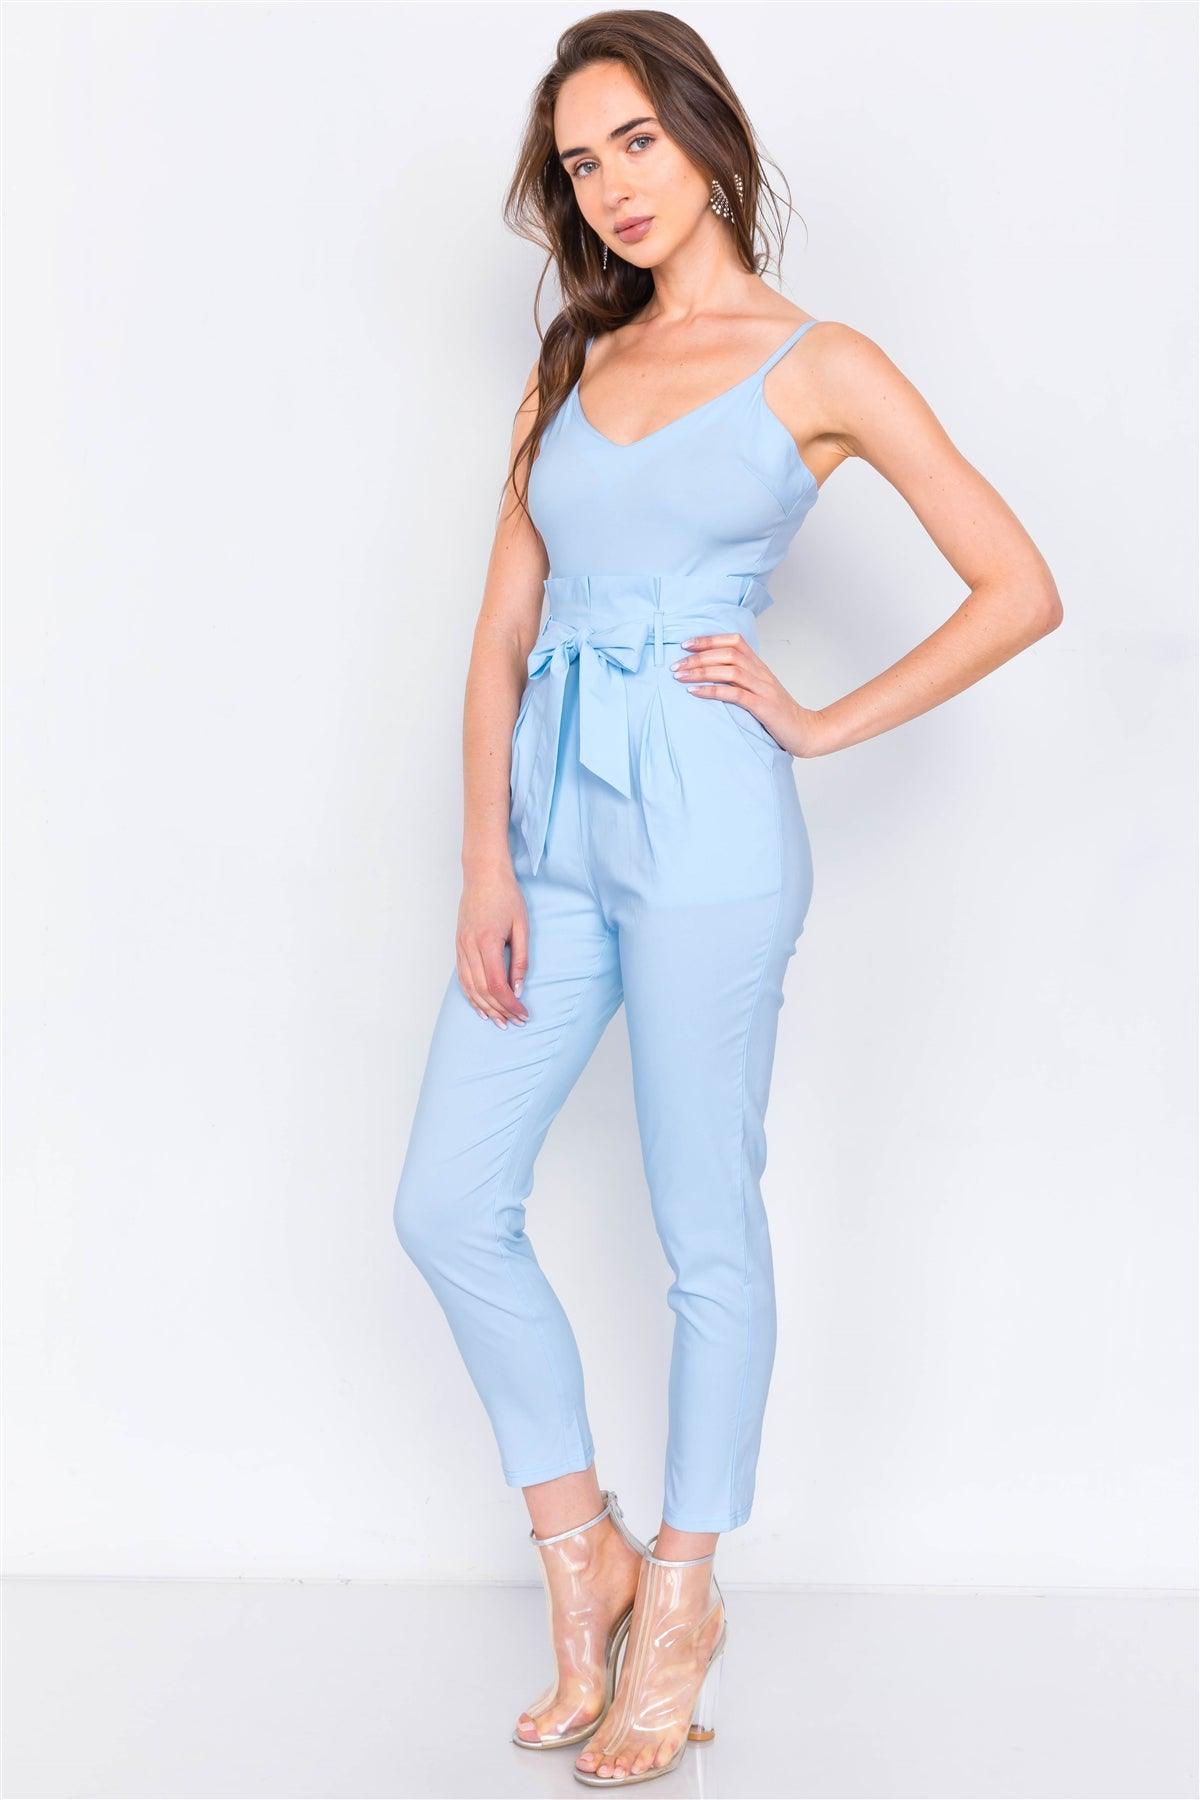 Baby Blue Mock High-Waist V-Neck Cami Casual Chic Jumpsuit